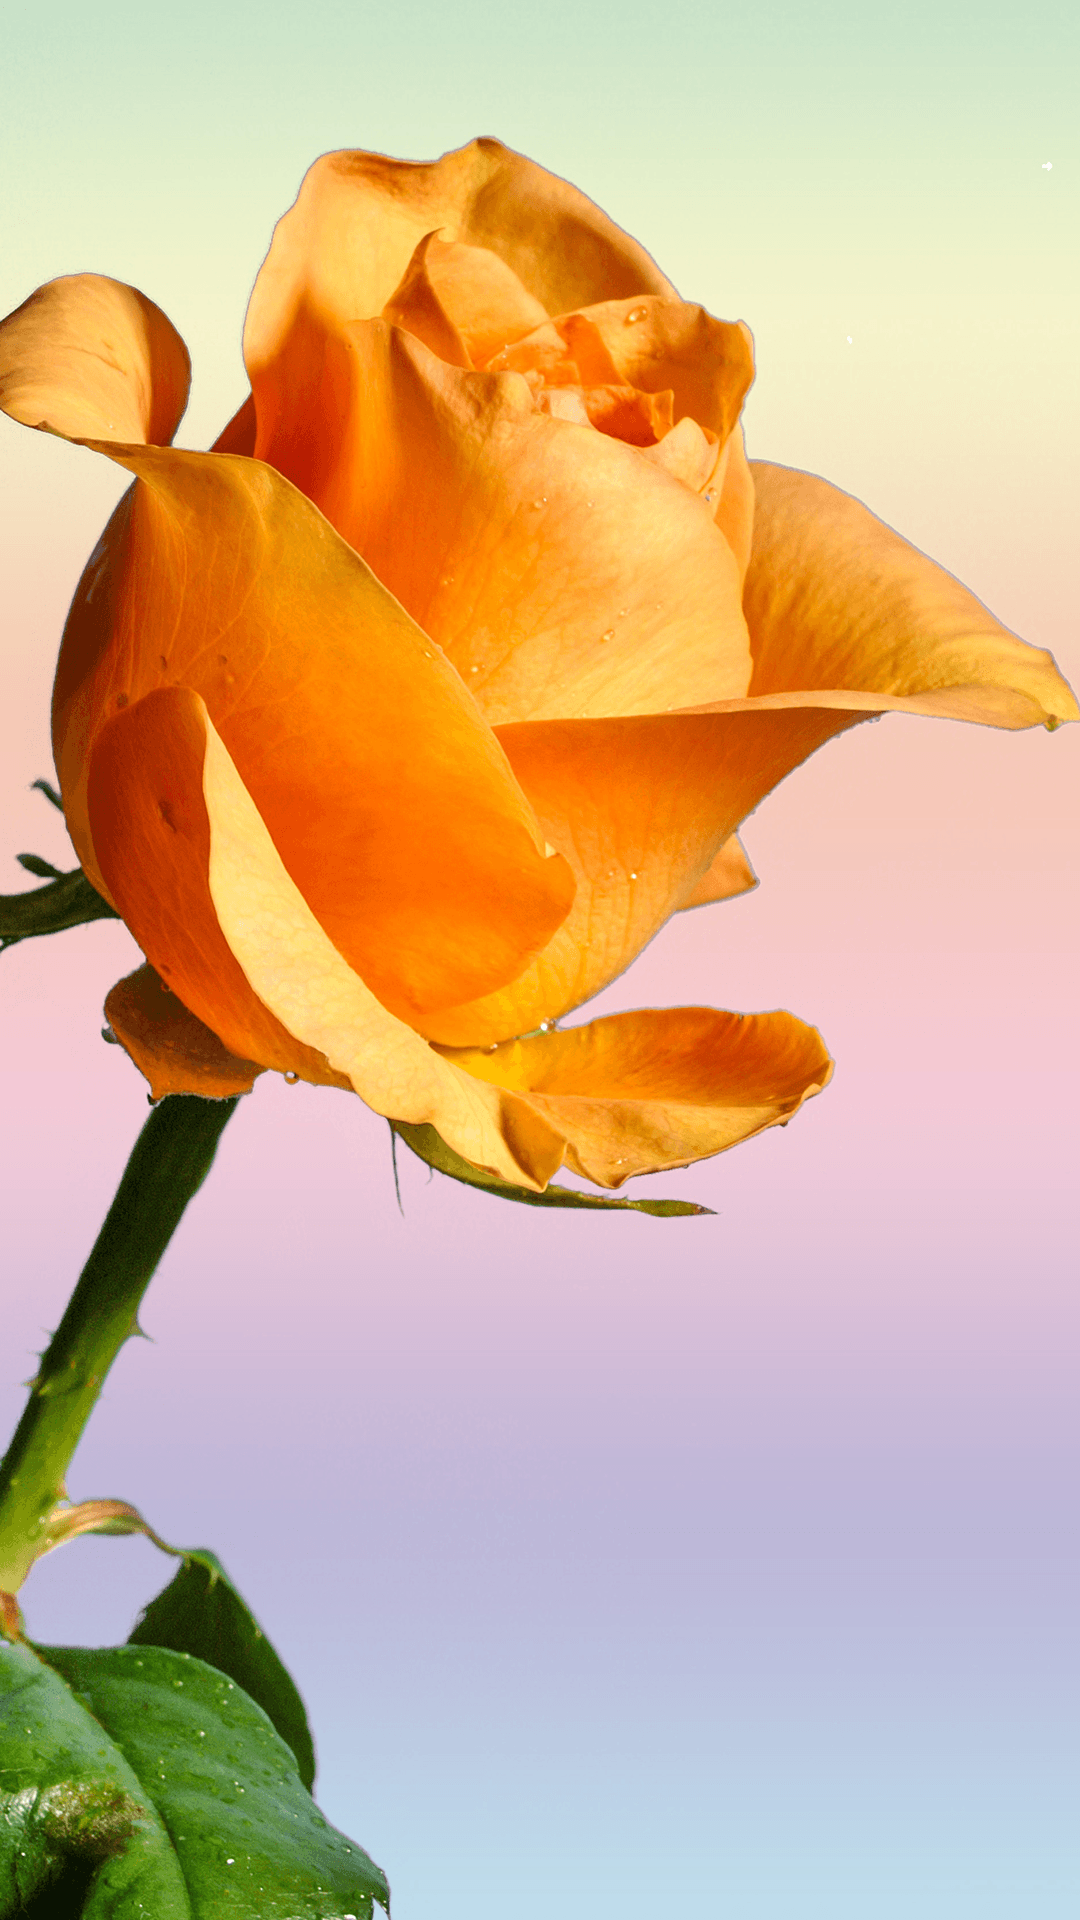 Download Yellow Rose Iphone Wallpapers Top Free Yellow Rose Iphone Backgrounds Wallpaperaccess